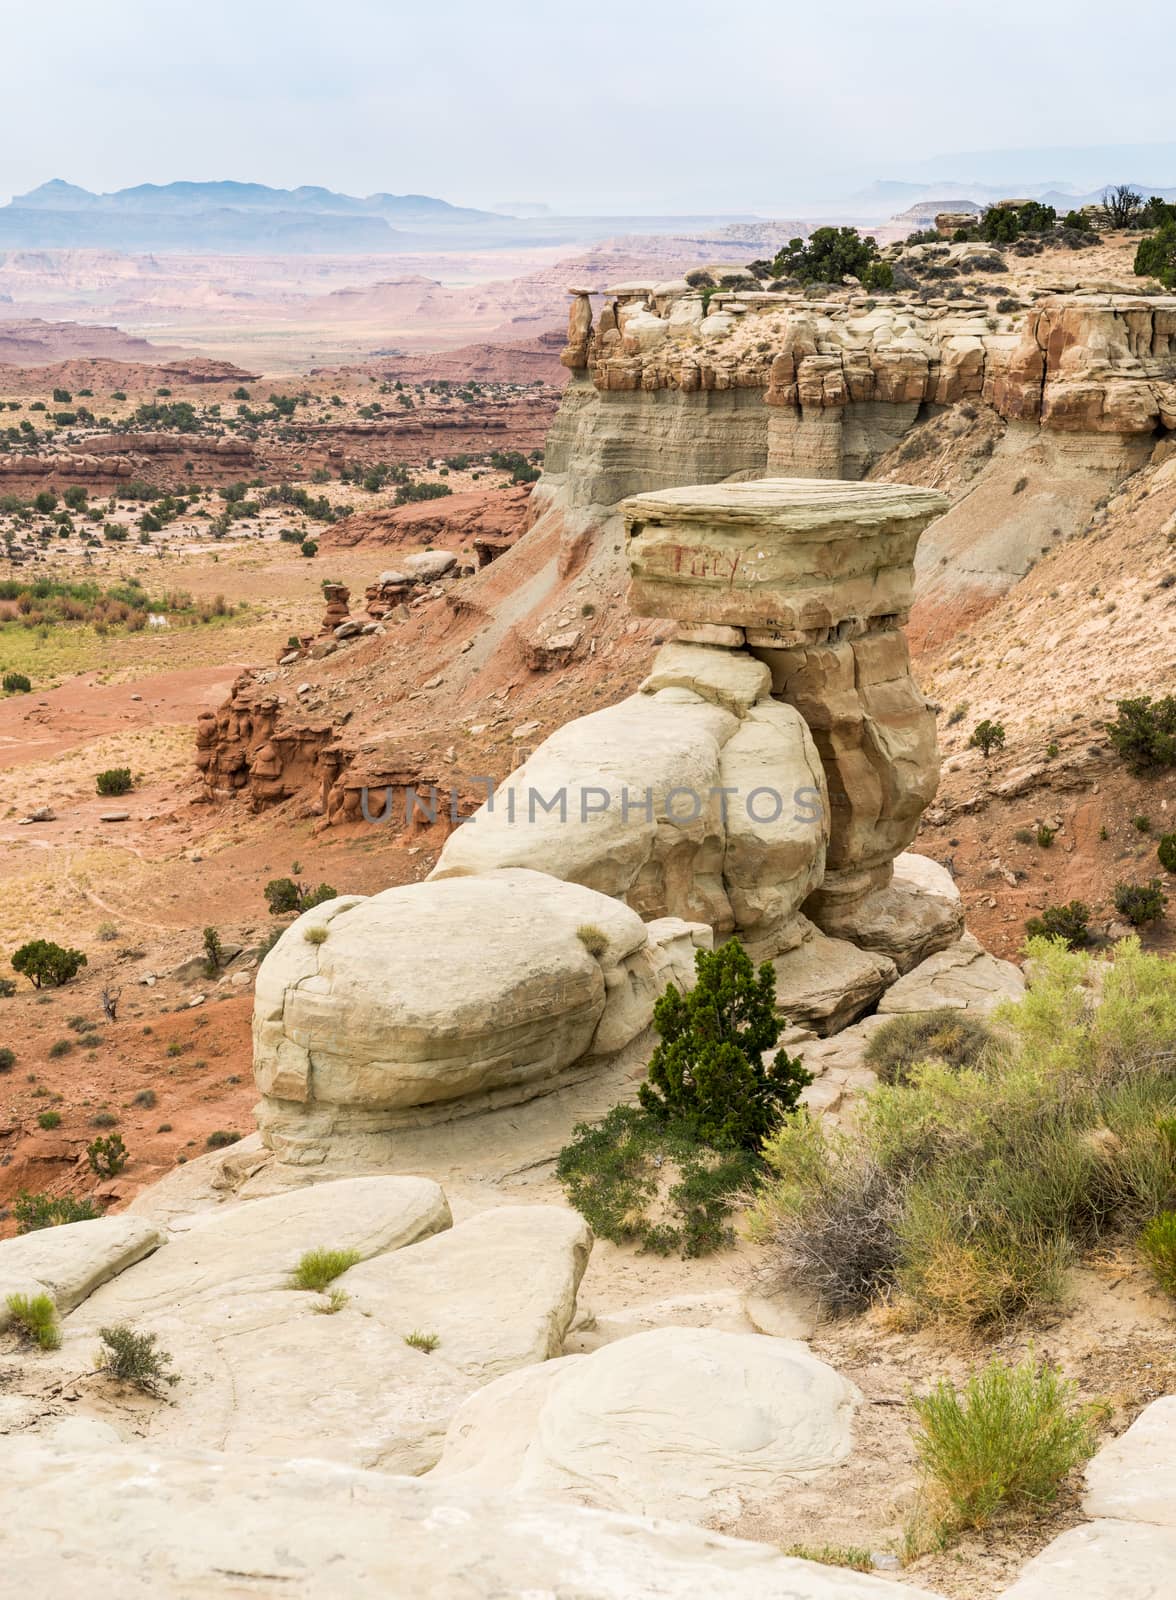 Cliffs in the San Rafael Swell in Utah off I-70 by Njean